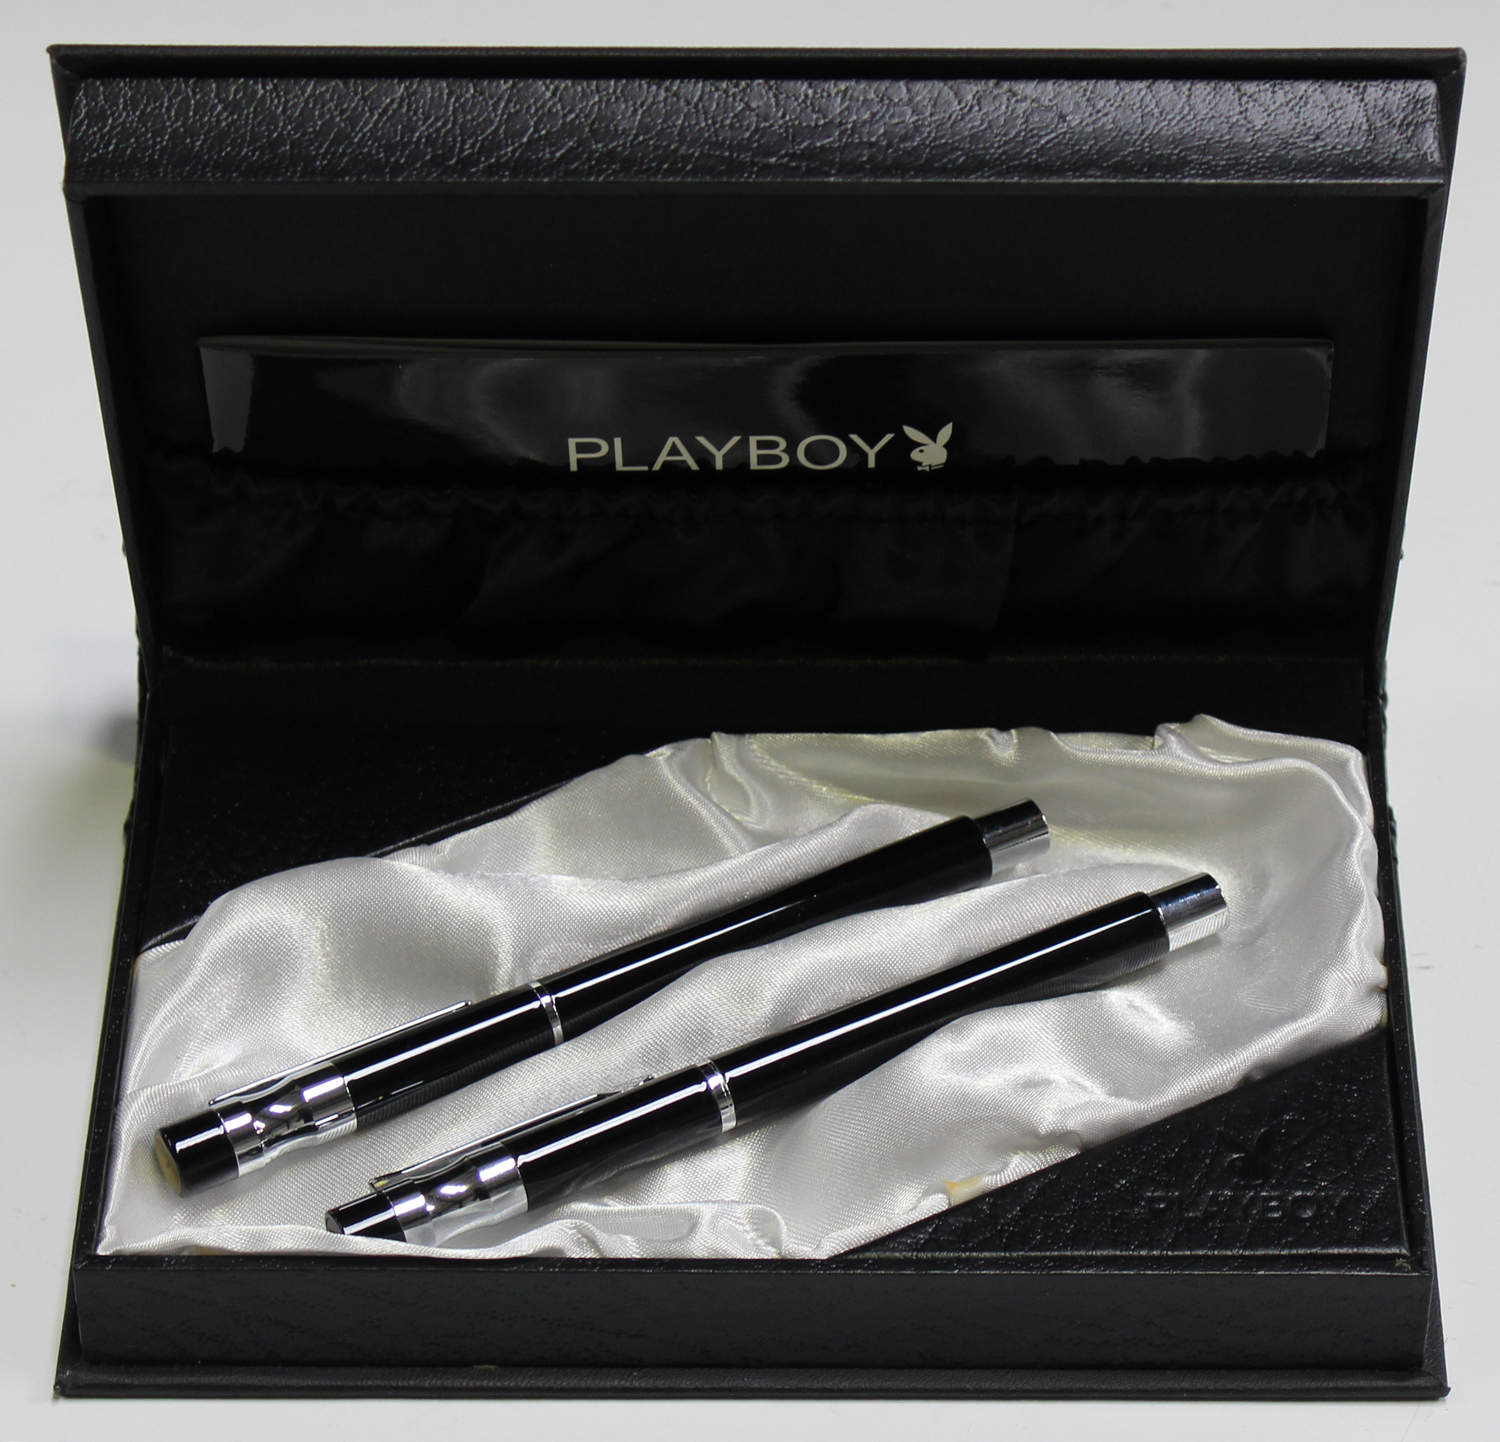 A Playboy fountain pen and rollerball pen set, within a Playboy writing instrument case and box.